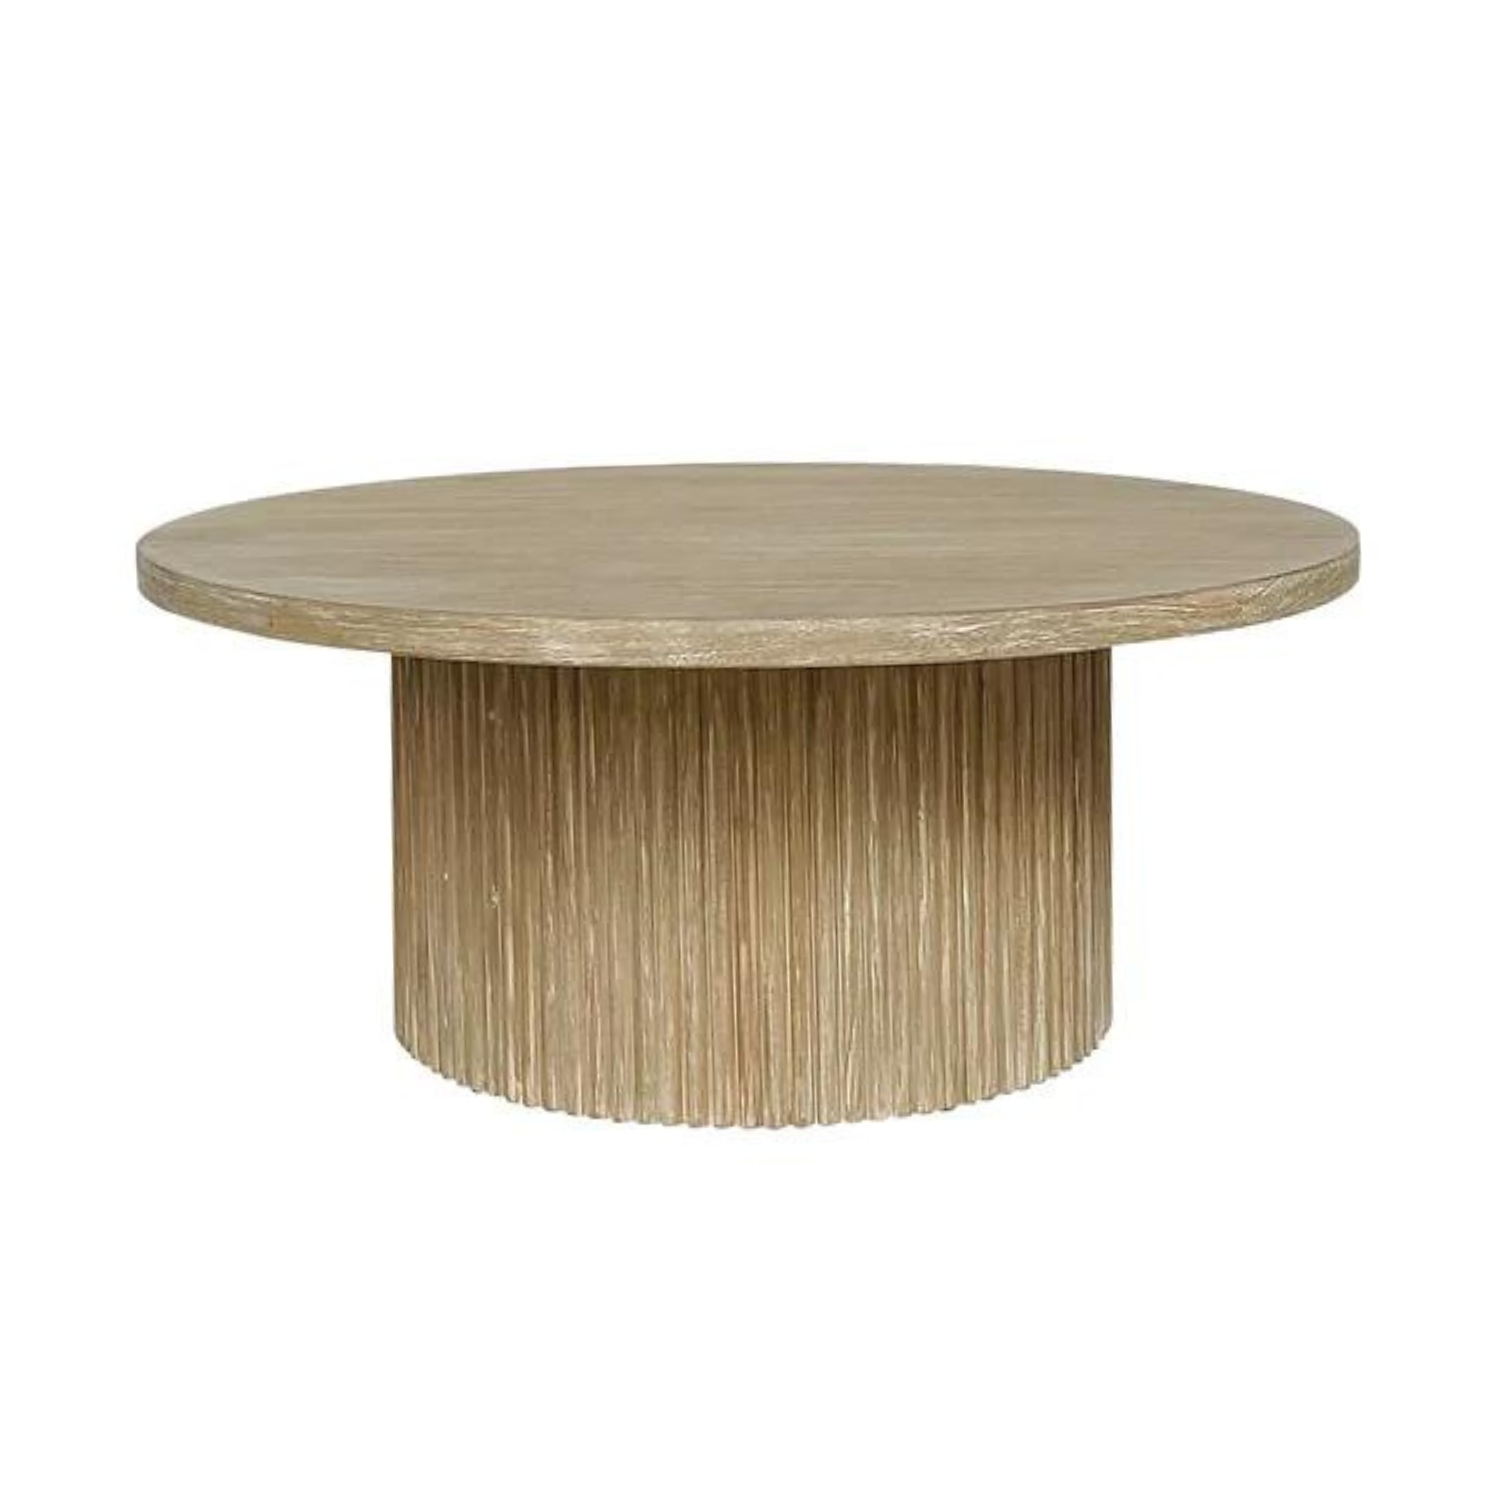 Ellie Round Coffee Table - Natural